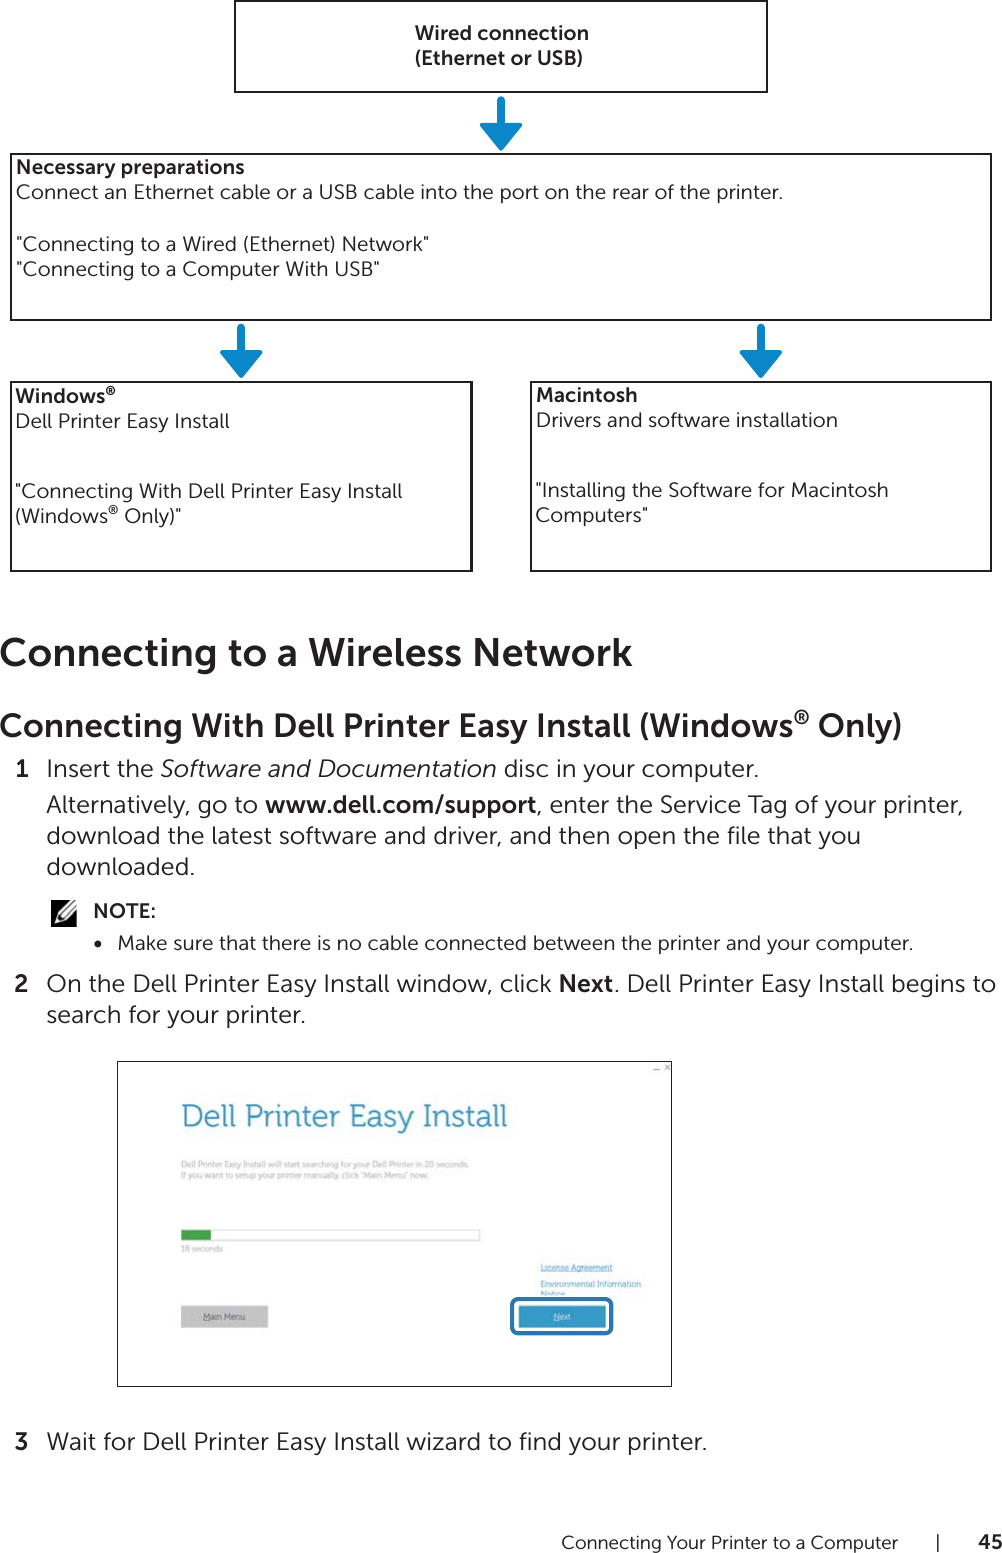 Connecting Your Printer to a Computer |45Connecting to a Wireless NetworkConnecting With Dell Printer Easy Install (Windows® Only)1Insert the Software and Documentation disc in your computer.Alternatively, go to www.dell.com/support, enter the Service Tag of your printer, download the latest software and driver, and then open the file that you downloaded.NOTE:•Make sure that there is no cable connected between the printer and your computer.2On the Dell Printer Easy Install window, click Next. Dell Printer Easy Install begins to search for your printer.3Wait for Dell Printer Easy Install wizard to find your printer.Wired connection(Ethernet or USB)Necessary preparationsConnect an Ethernet cable or a USB cable into the port on the rear of the printer.&quot;Connecting to a Wired (Ethernet) Network&quot;&quot;Connecting to a Computer With USB&quot;Windows®Dell Printer Easy InstallMacintoshDrivers and software installation&quot;Connecting With Dell Printer Easy Install (Windows® Only)&quot;&quot;Installing the Software for Macintosh Computers&quot;